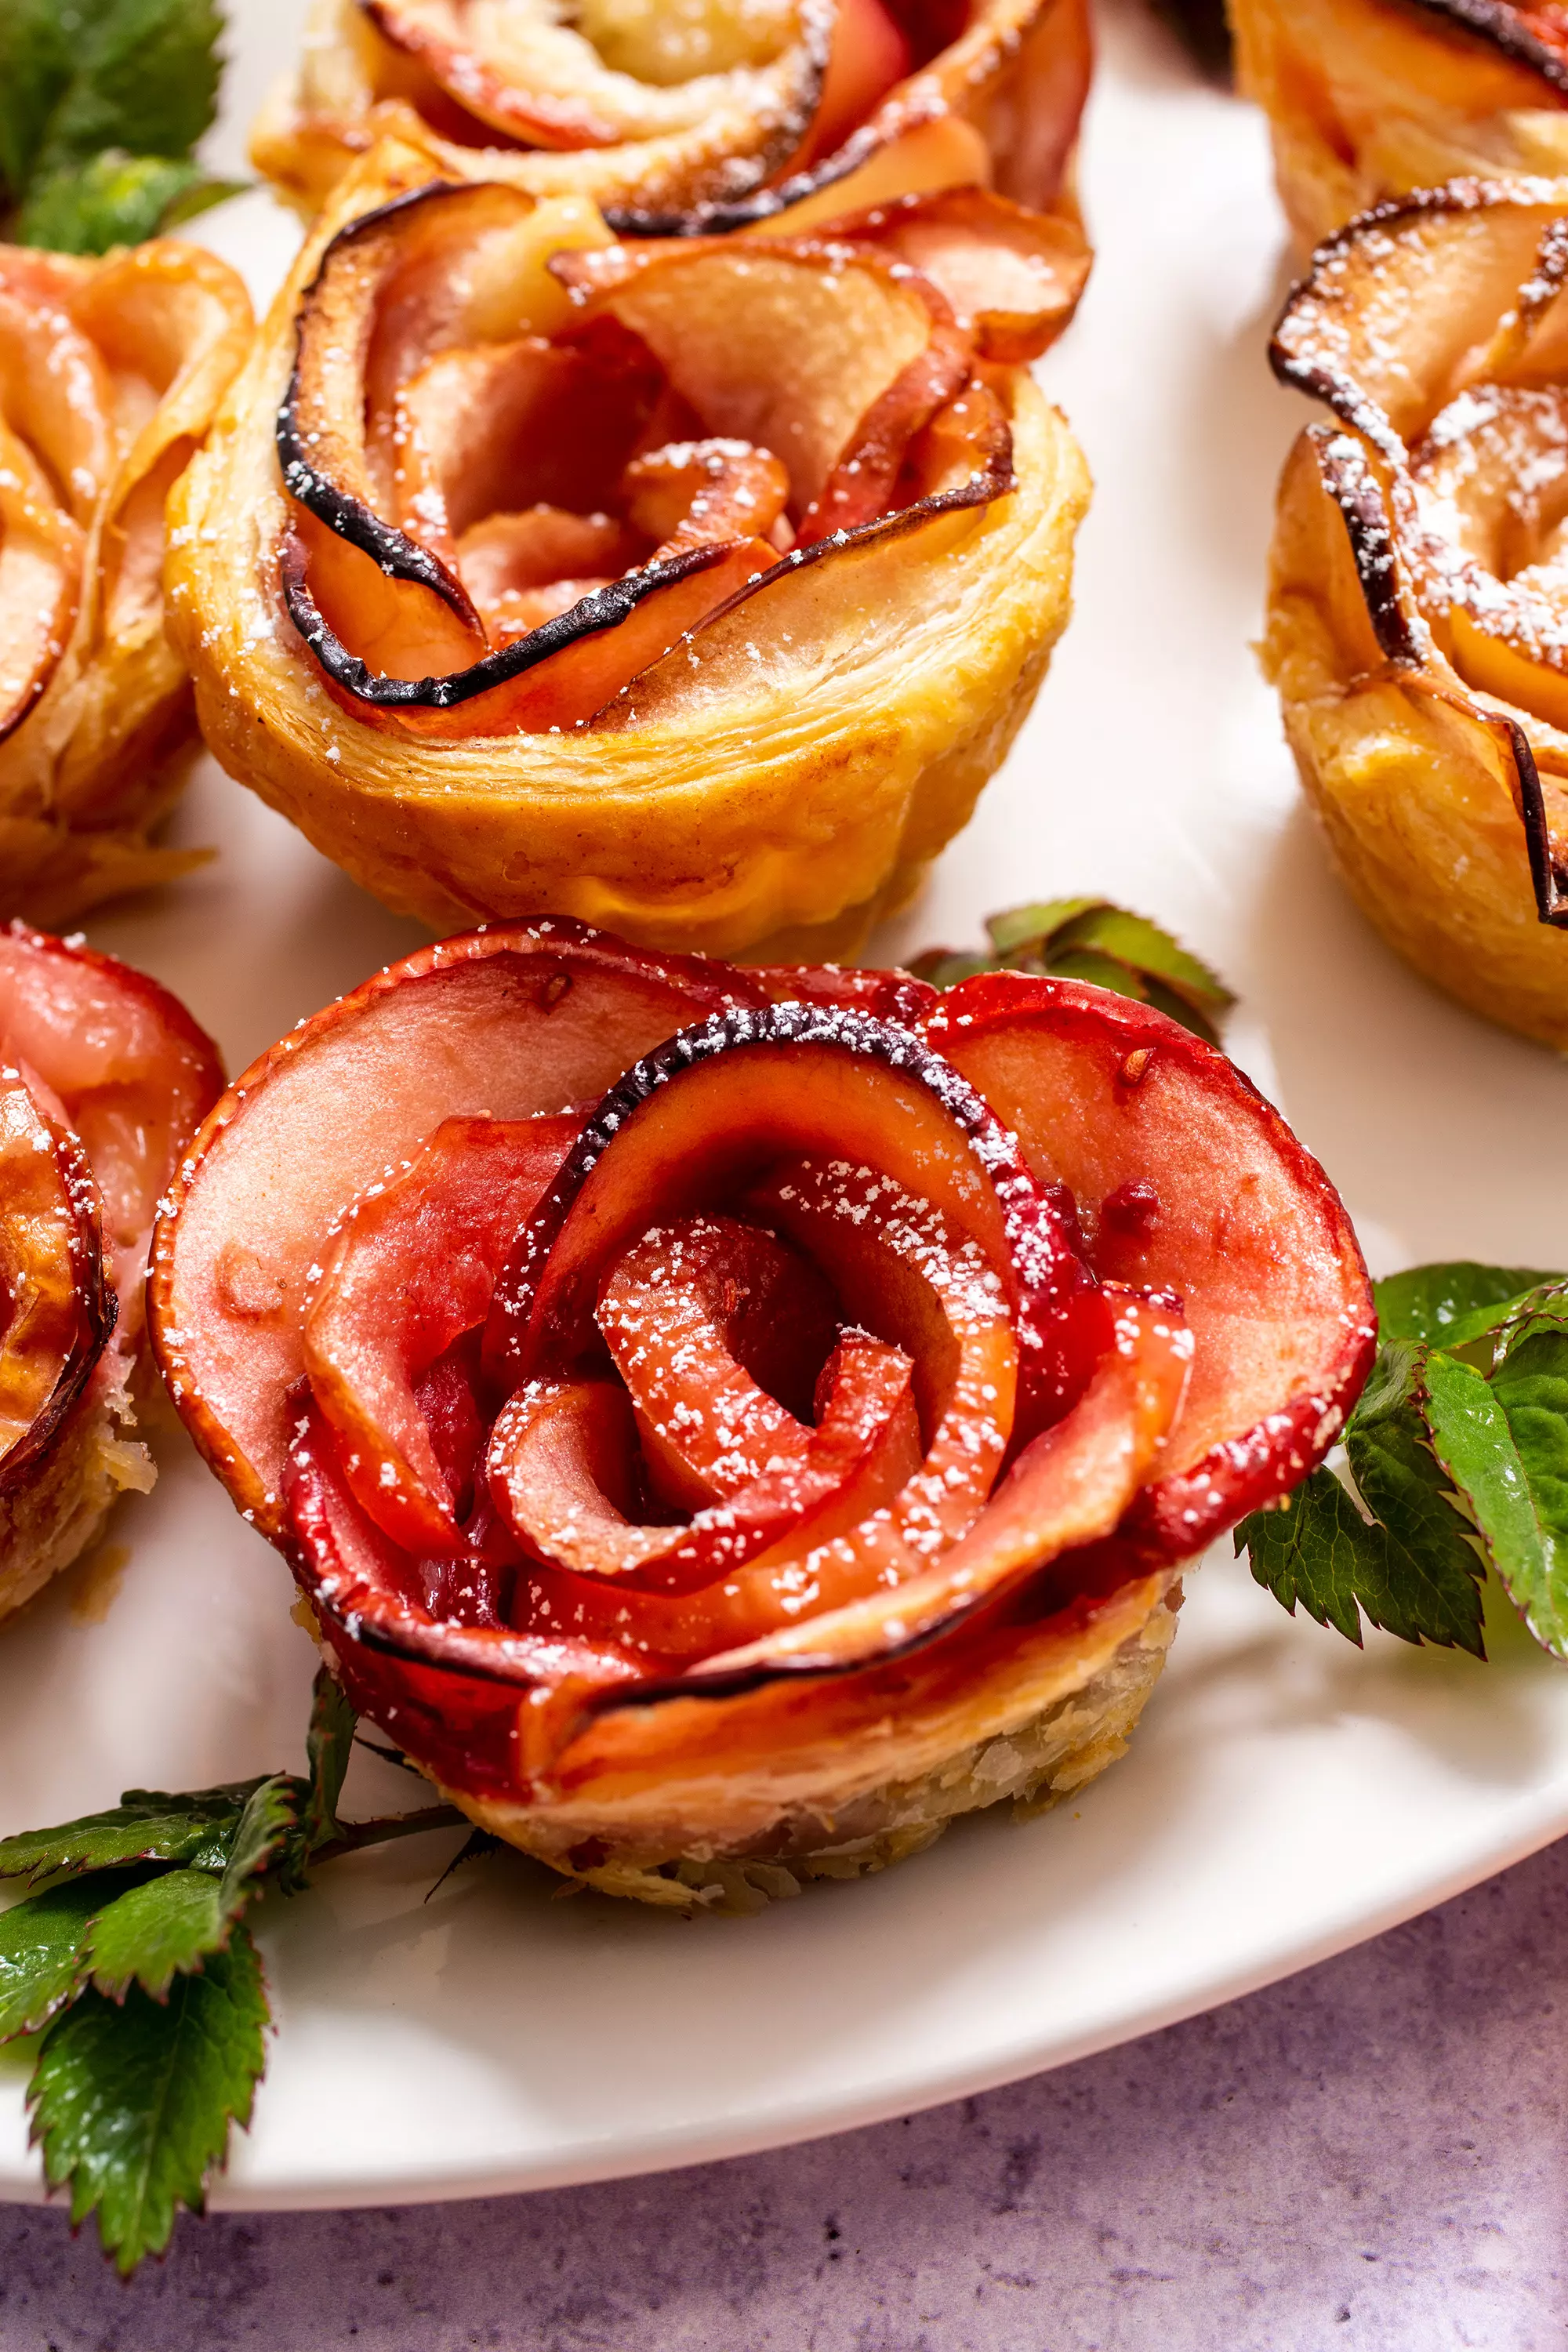 Easy Puff Pastry Apple Roses - House of Nash Eats